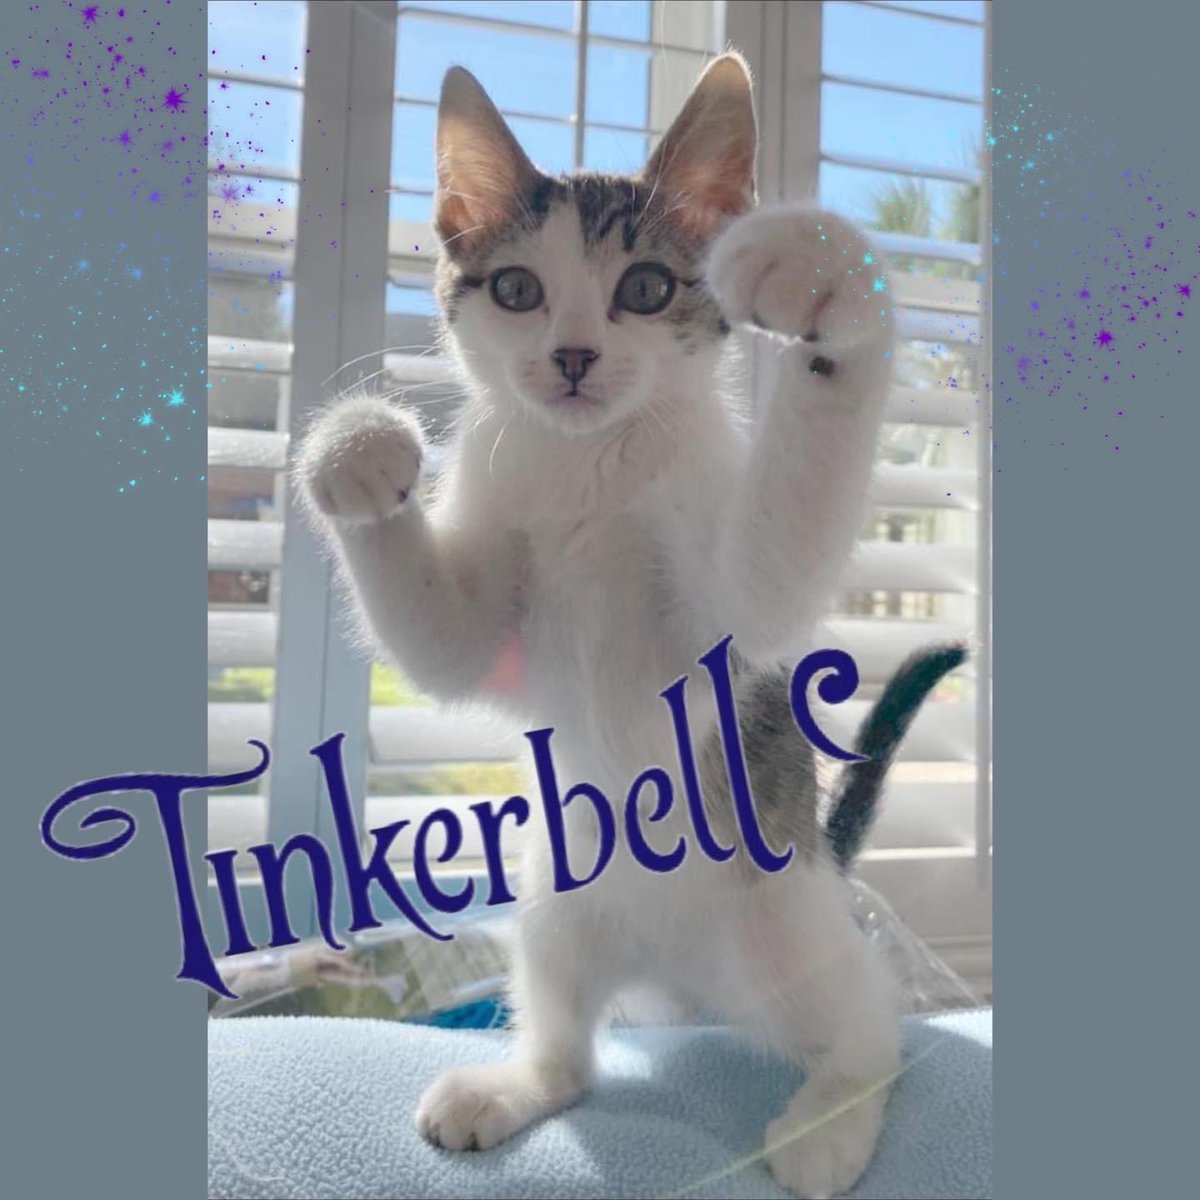 🚨NEW ARRIVAL!🚨 TINKERBELL 🧚 is clearly ready to play! She loves to be with people and did well with kids & friendly small dogs while in foster care. Female kitten age 13 weeks #kittens #CatsofTwittter #animalrescue #AdoptDontShop #kittensoftwitter